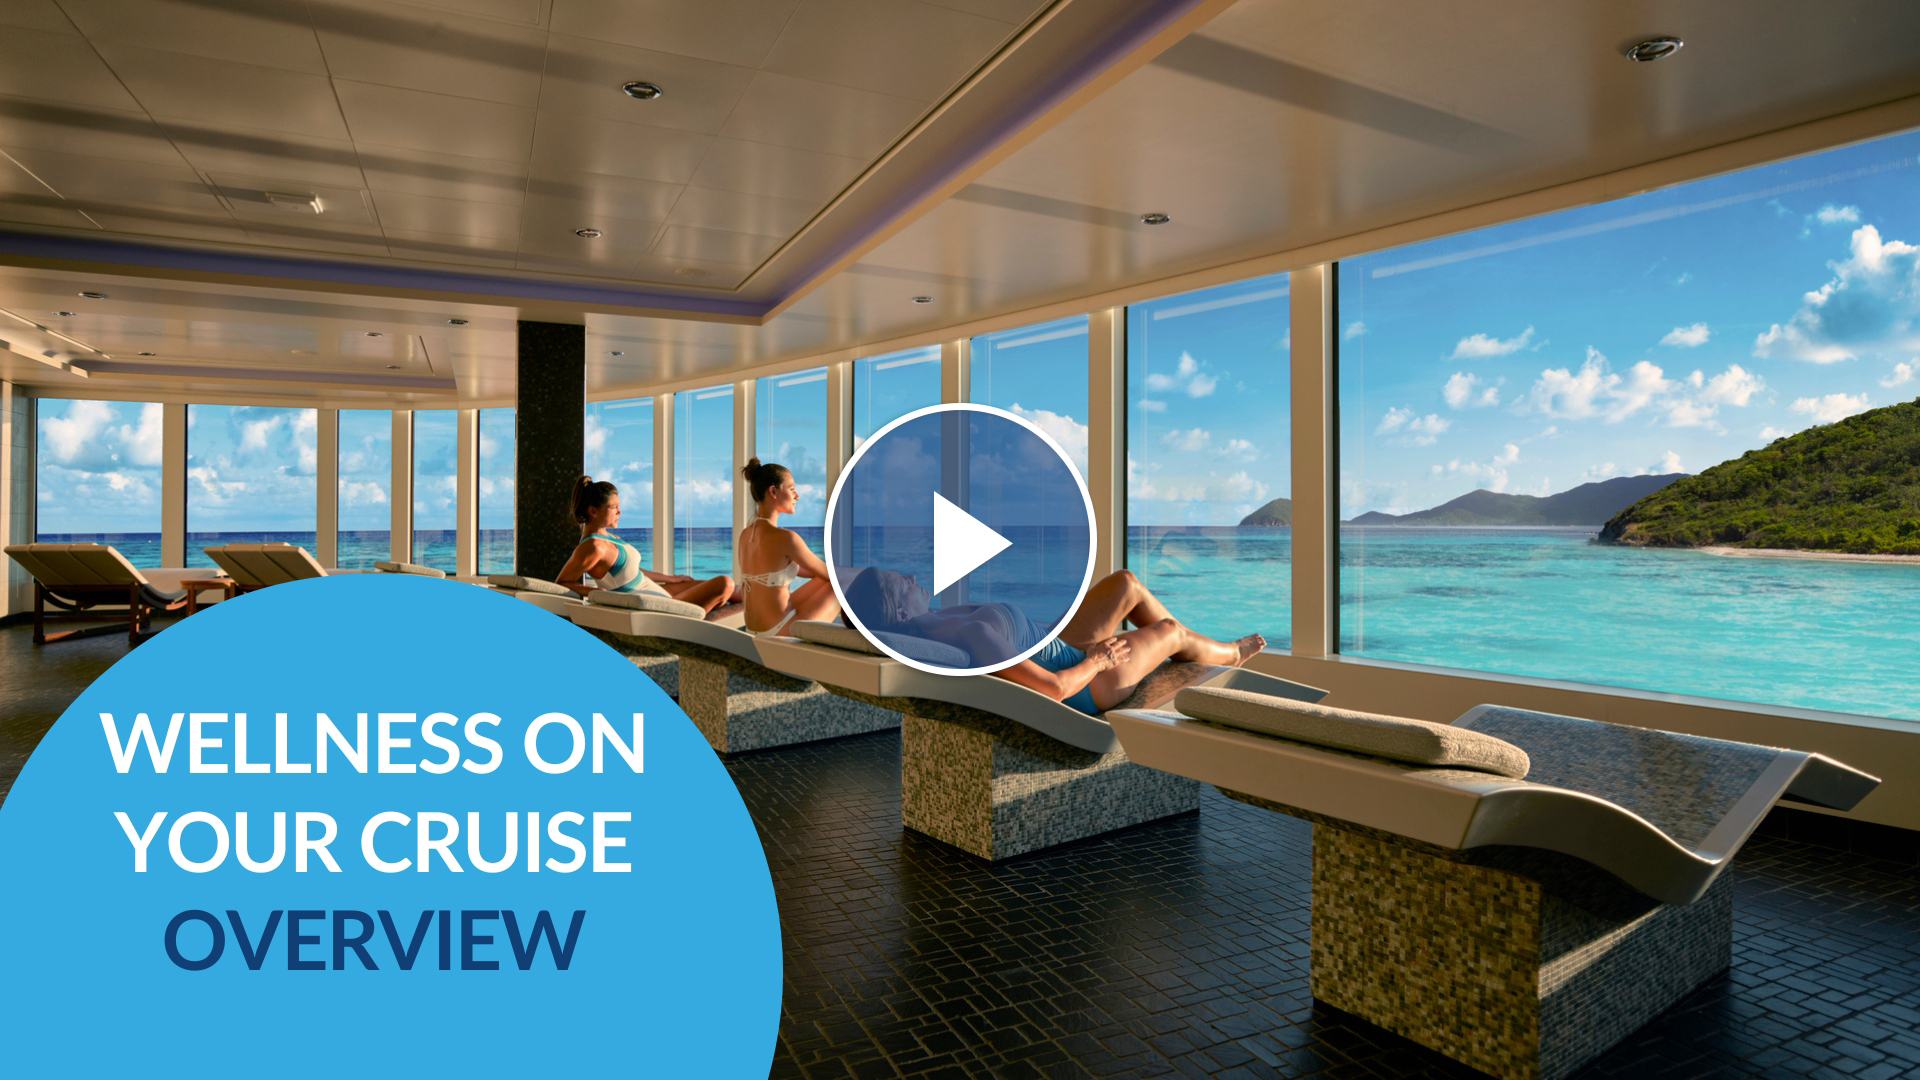 Wellness on Cruise Overview